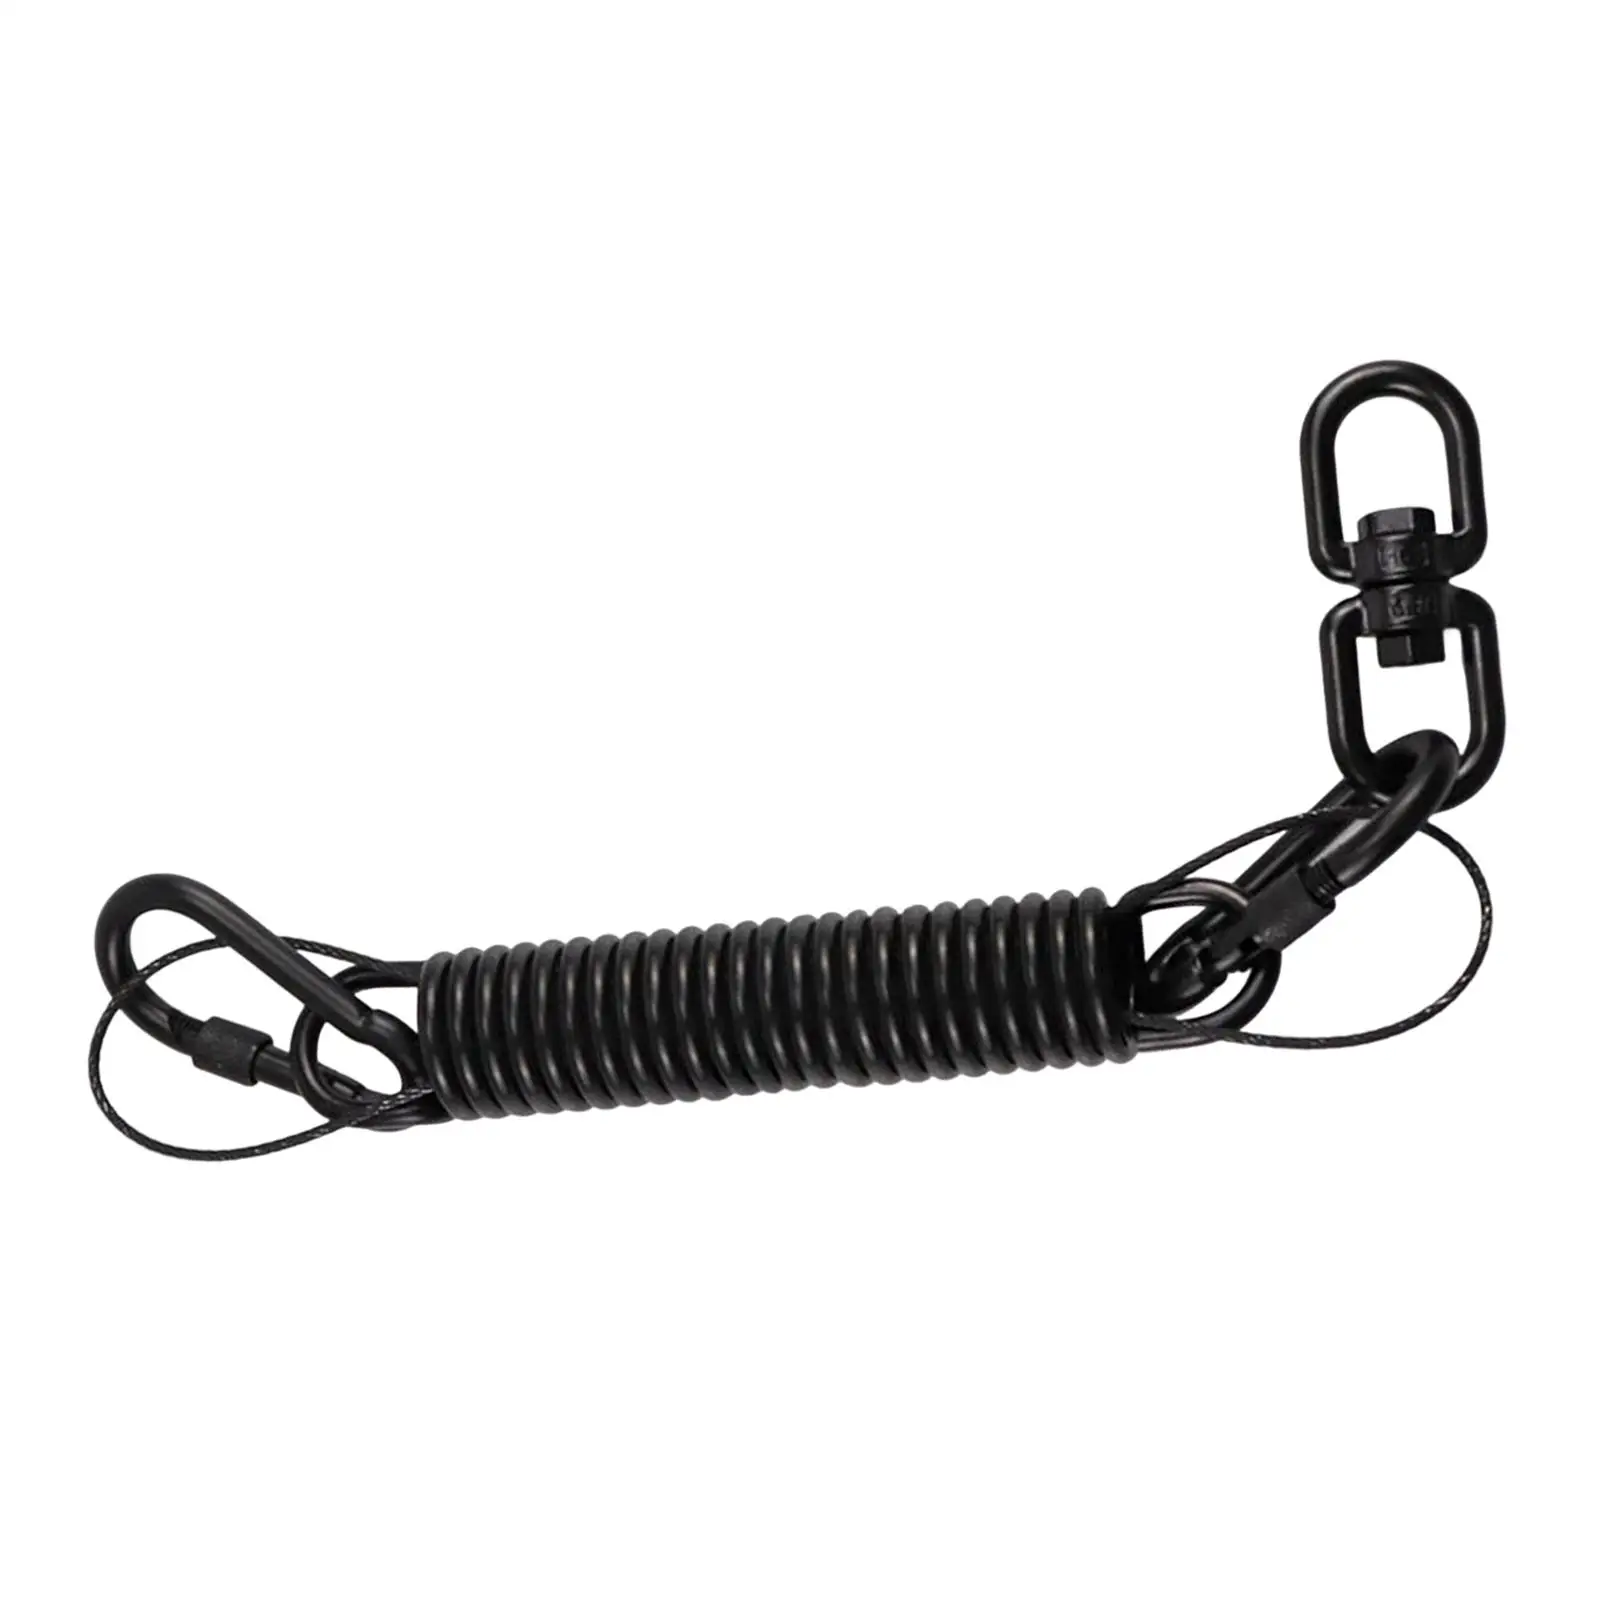 Heavy Duty Swing Spring, Durable Shock Absorbing with , Hammock Spring for Hanging Chair Garden Heavy Bag, Outdoor